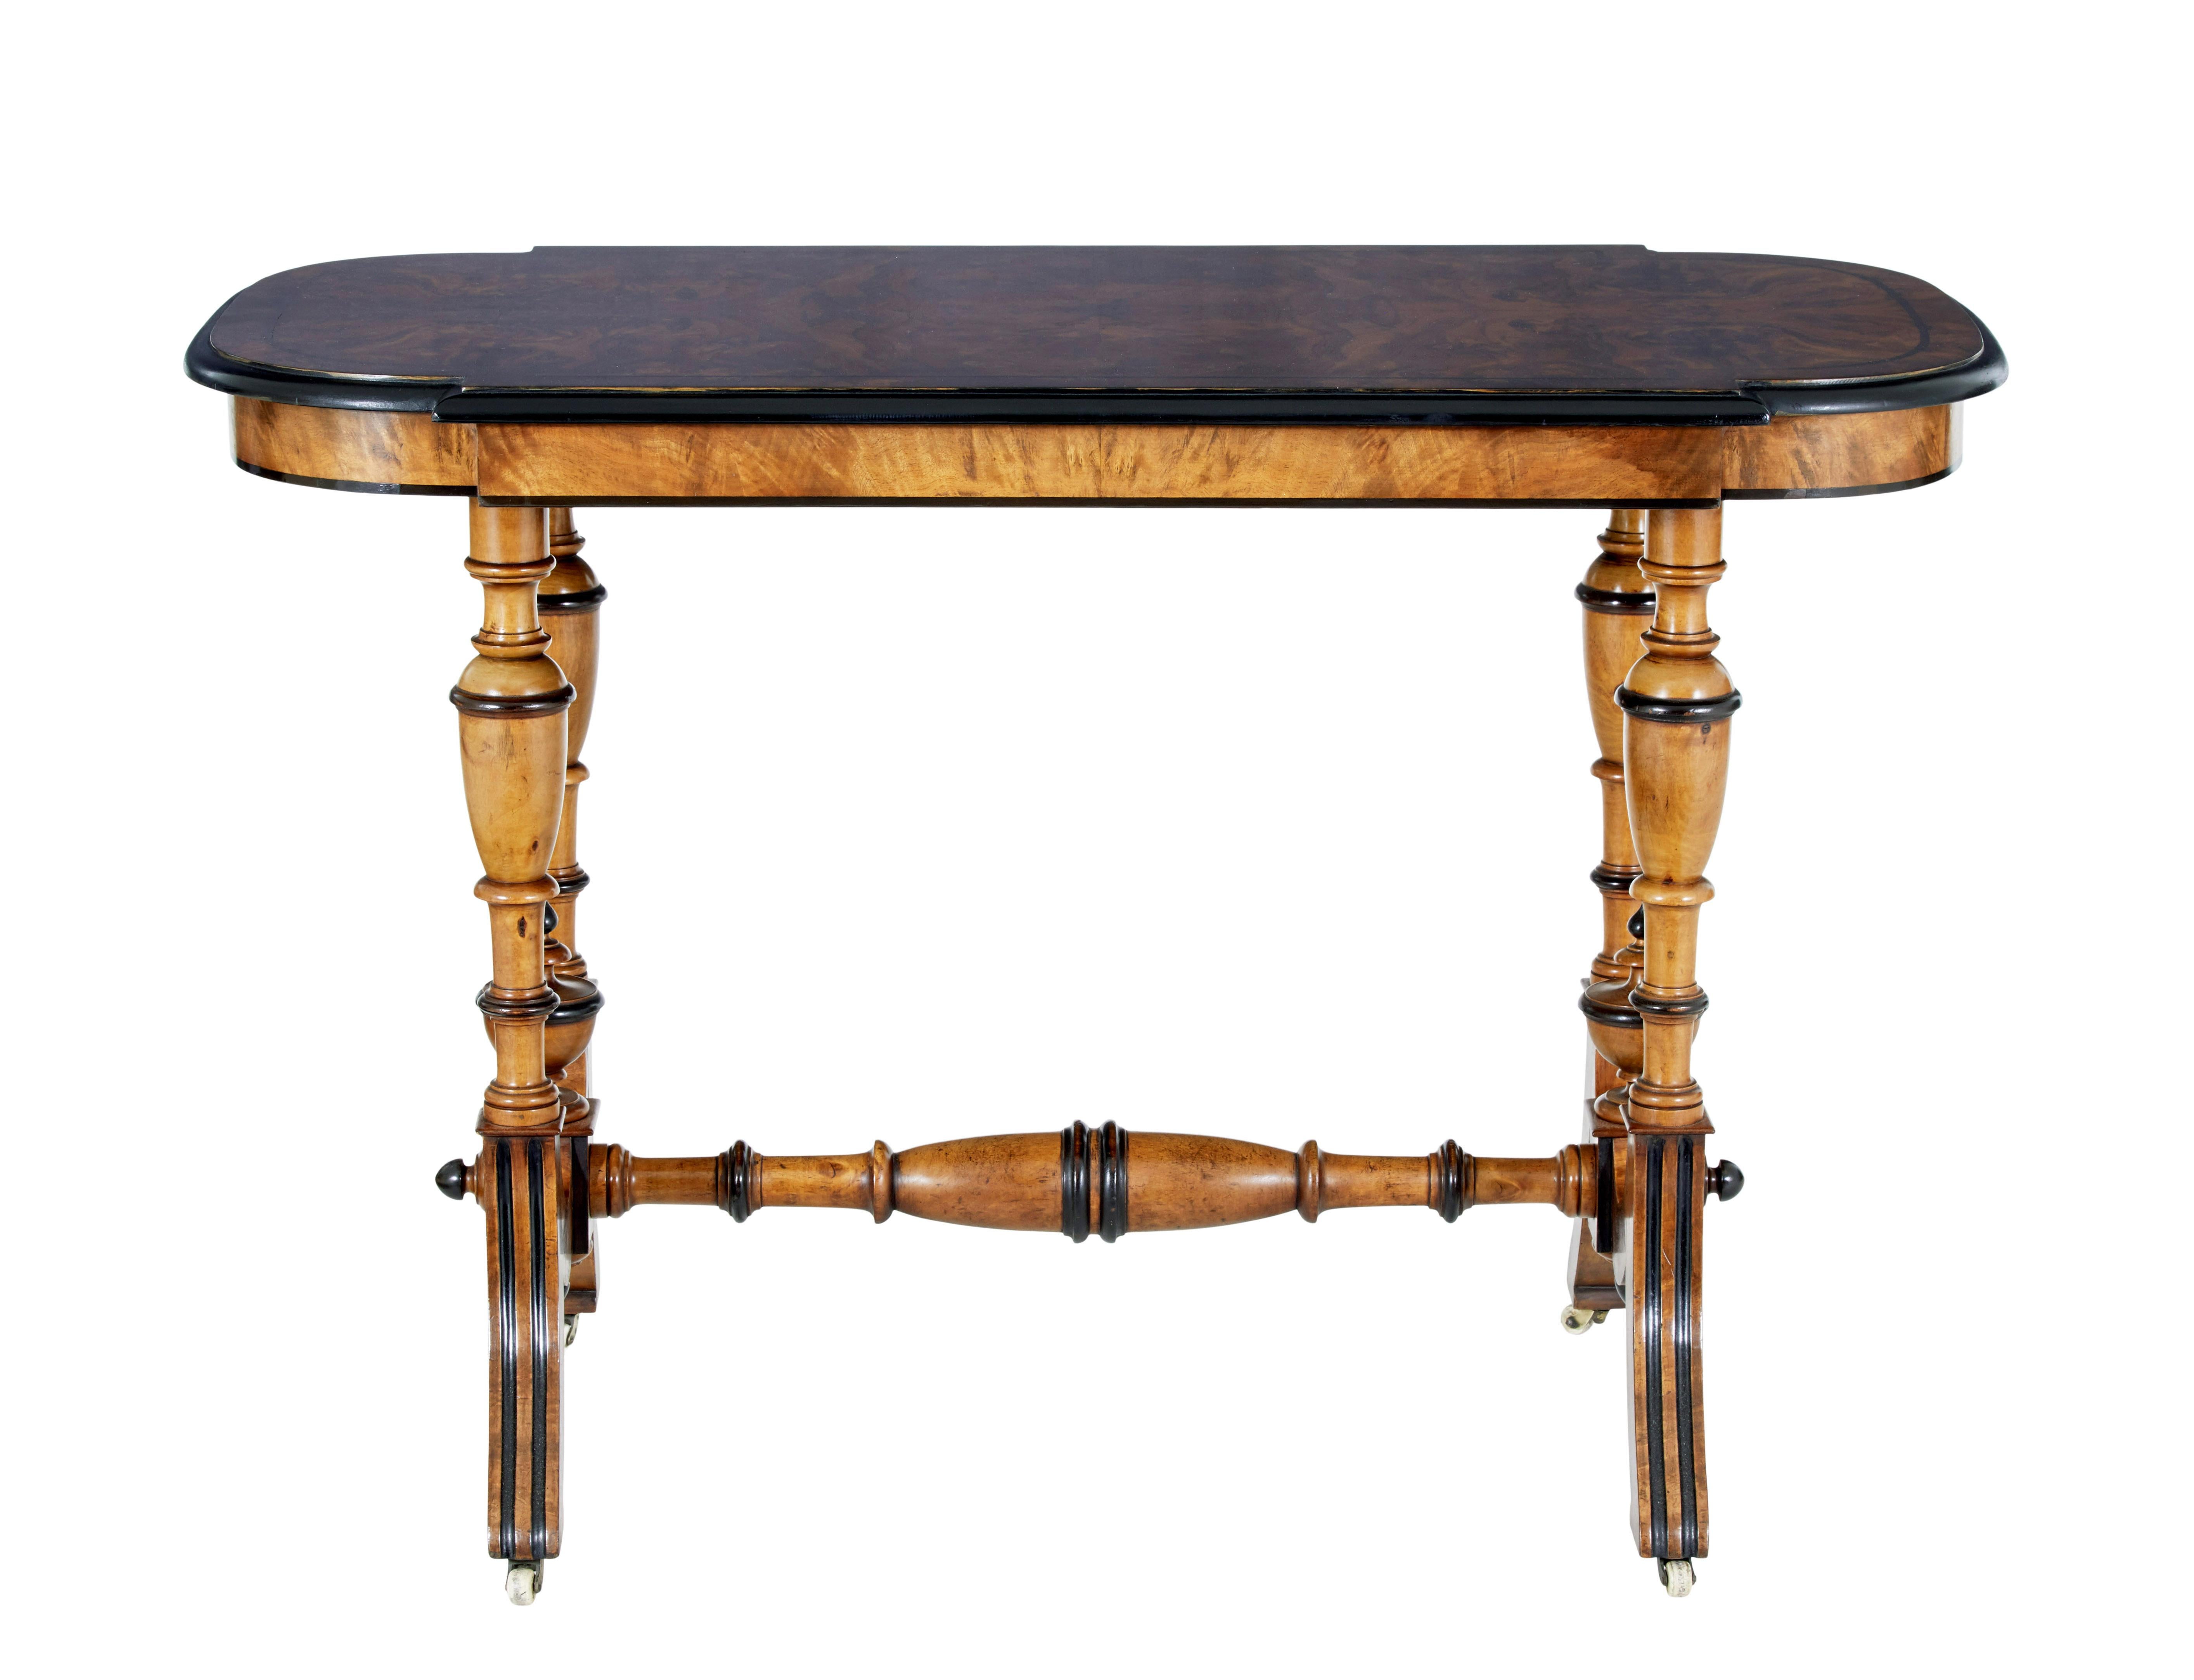 Late 19th century aesthetic movement walnut occasional table circa 1890.

Shaped top surface with matched burr walnut veneers, ebony stringing and ebonised outer edge.  Supported by 4 turned legs and stretcher, all with further ebonised elements and